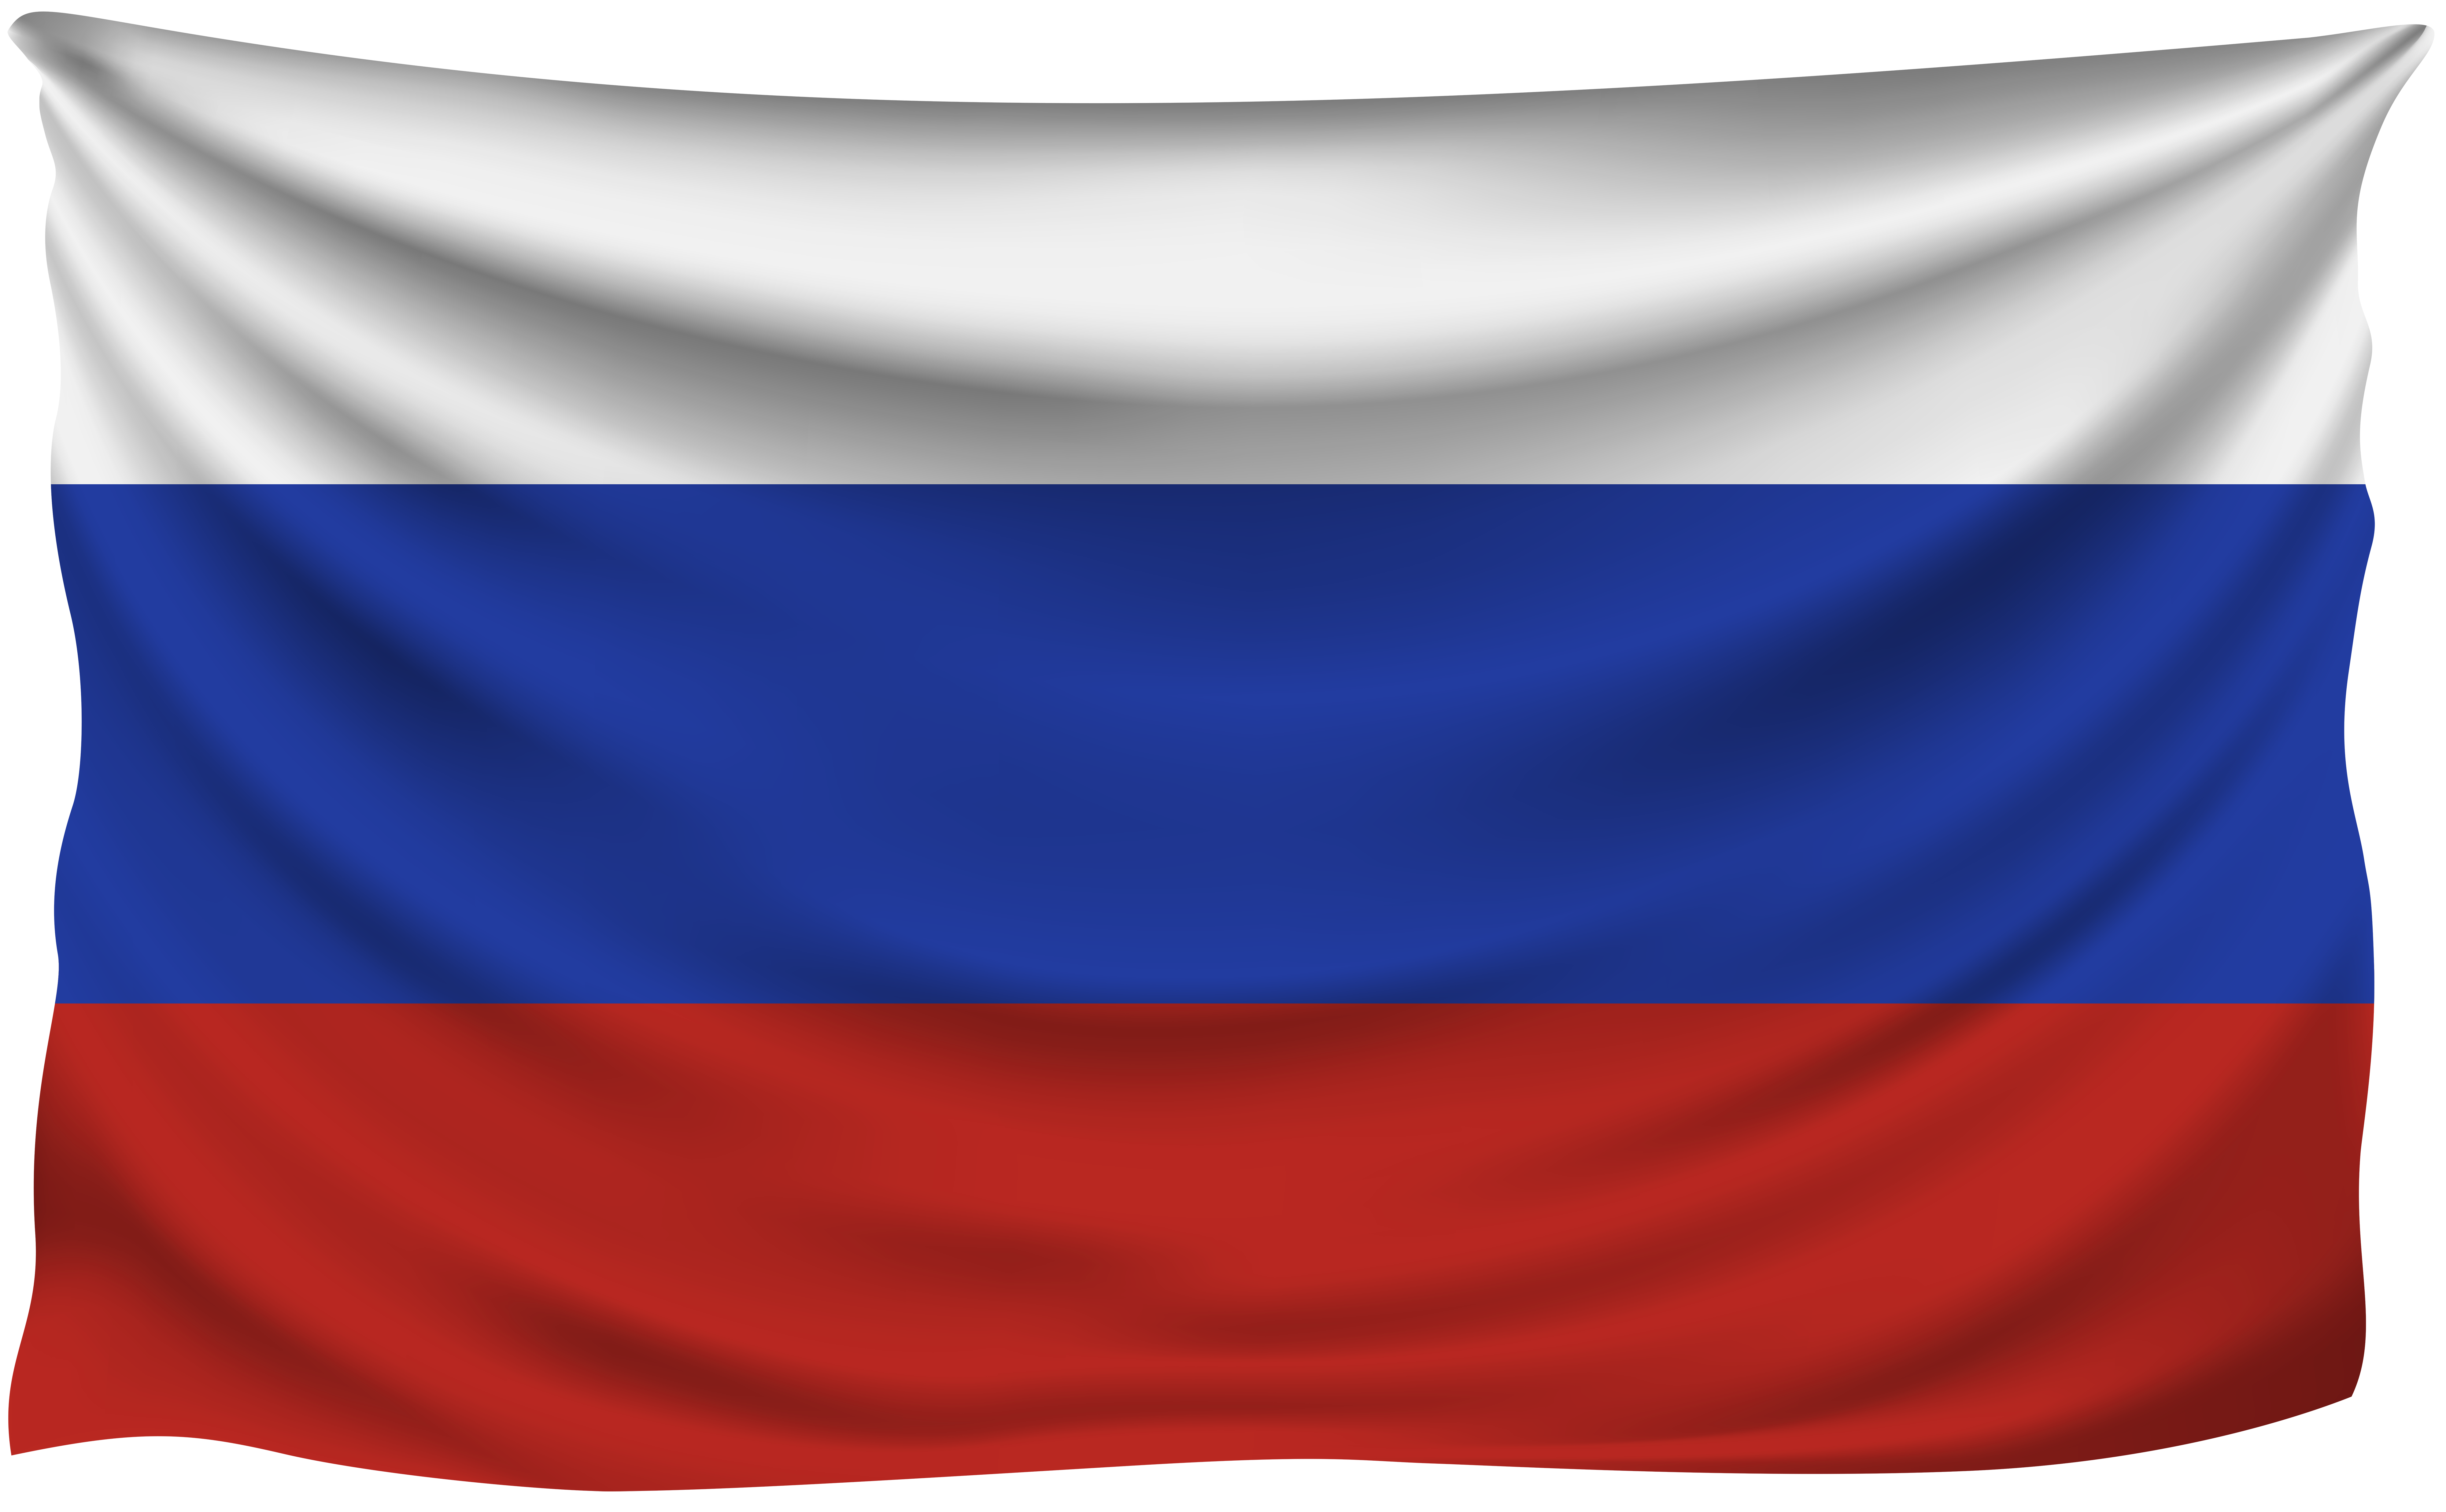 Russia Wrinkled Flag | Gallery Yopriceville - High-Quality Images and